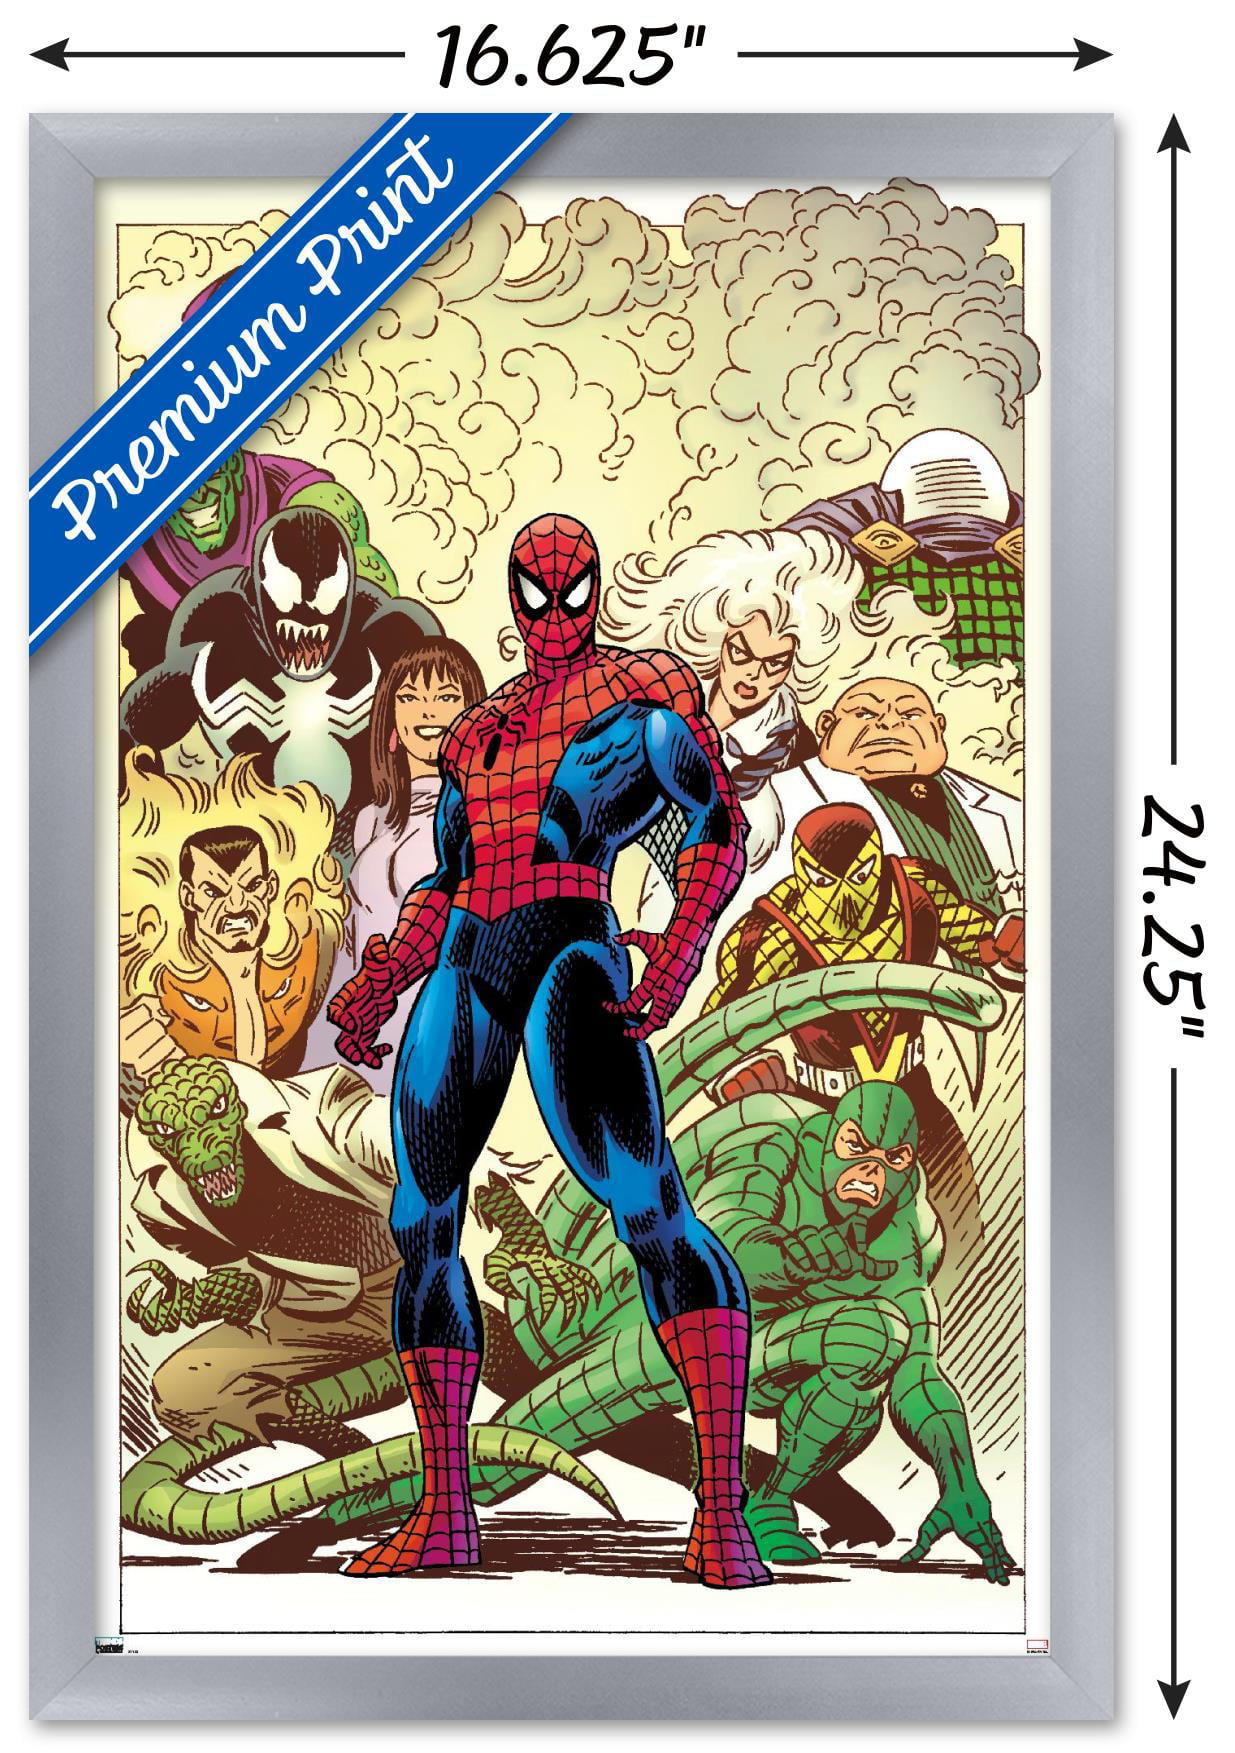 Marvel Comics - Spider-Man - The Amazing Spider-Man #1 Wall Poster, 14.725